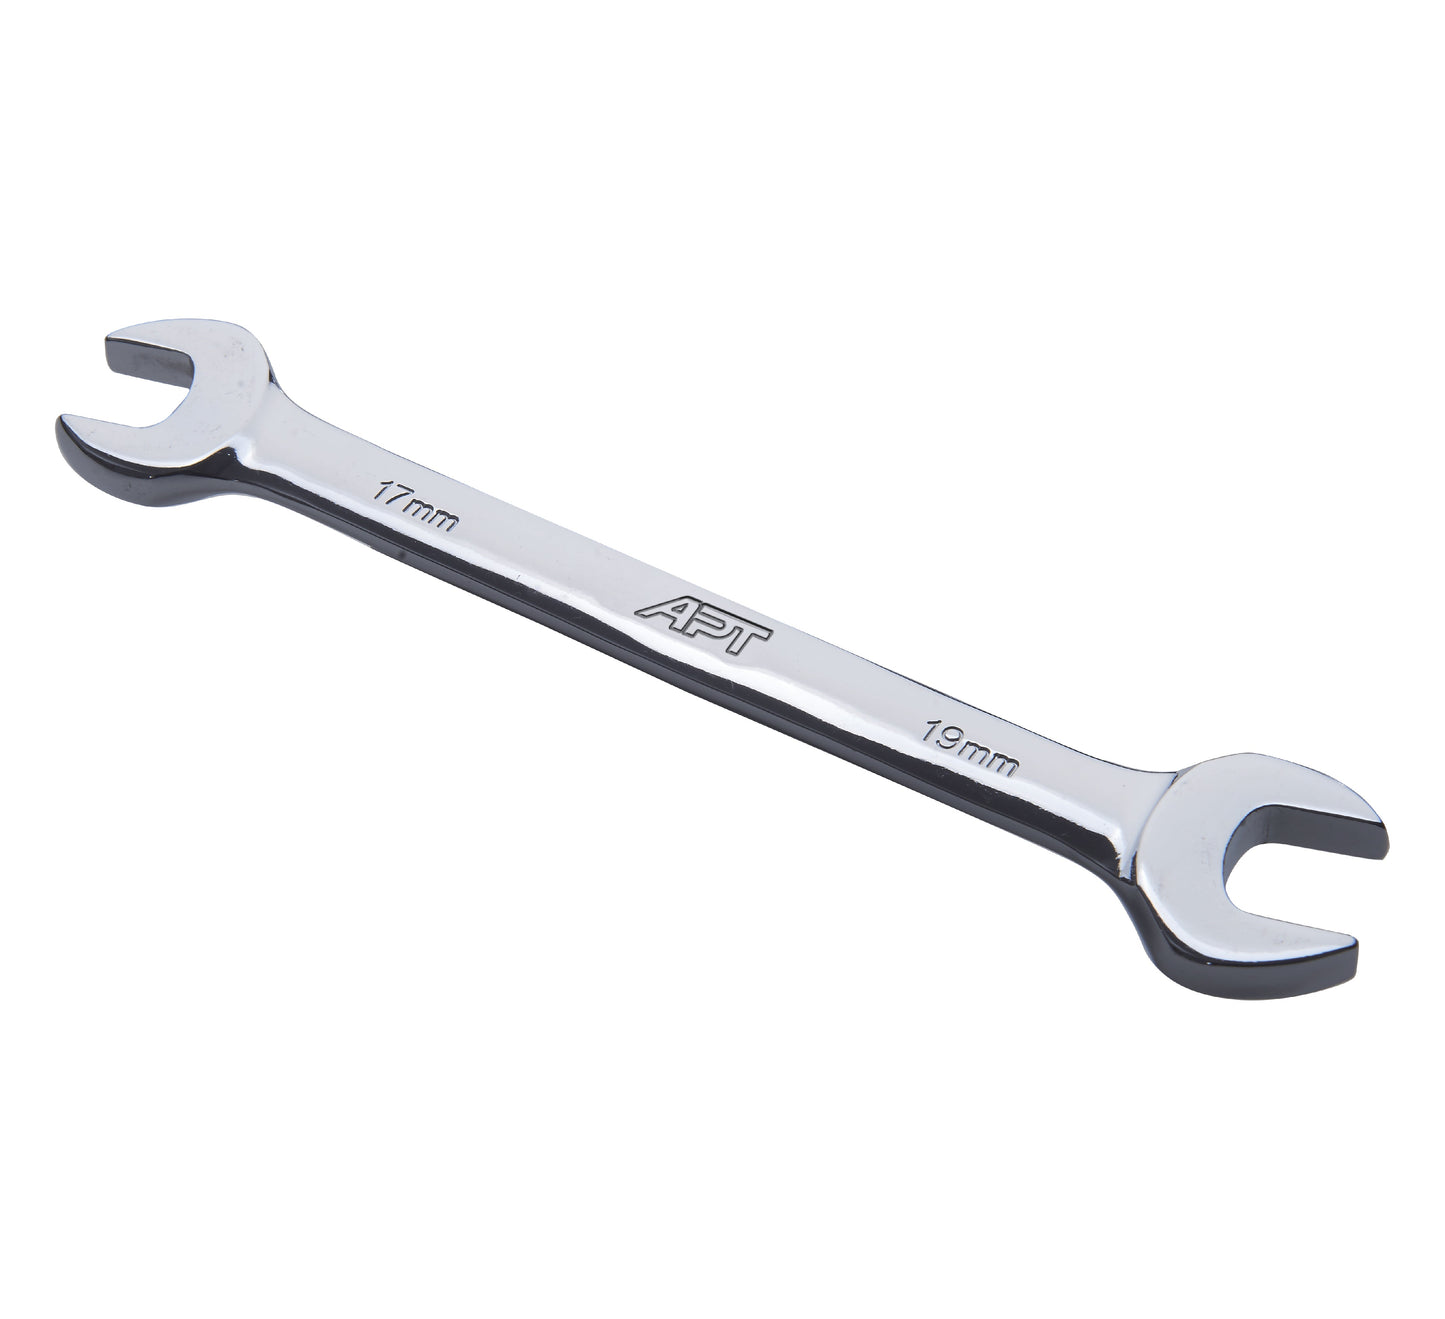 APT DOUBLE OPEN END WRENCH BRIGHT SATIN FINISH PP CARD HOLDER CR-V 08X09MM-AH251401-08X09